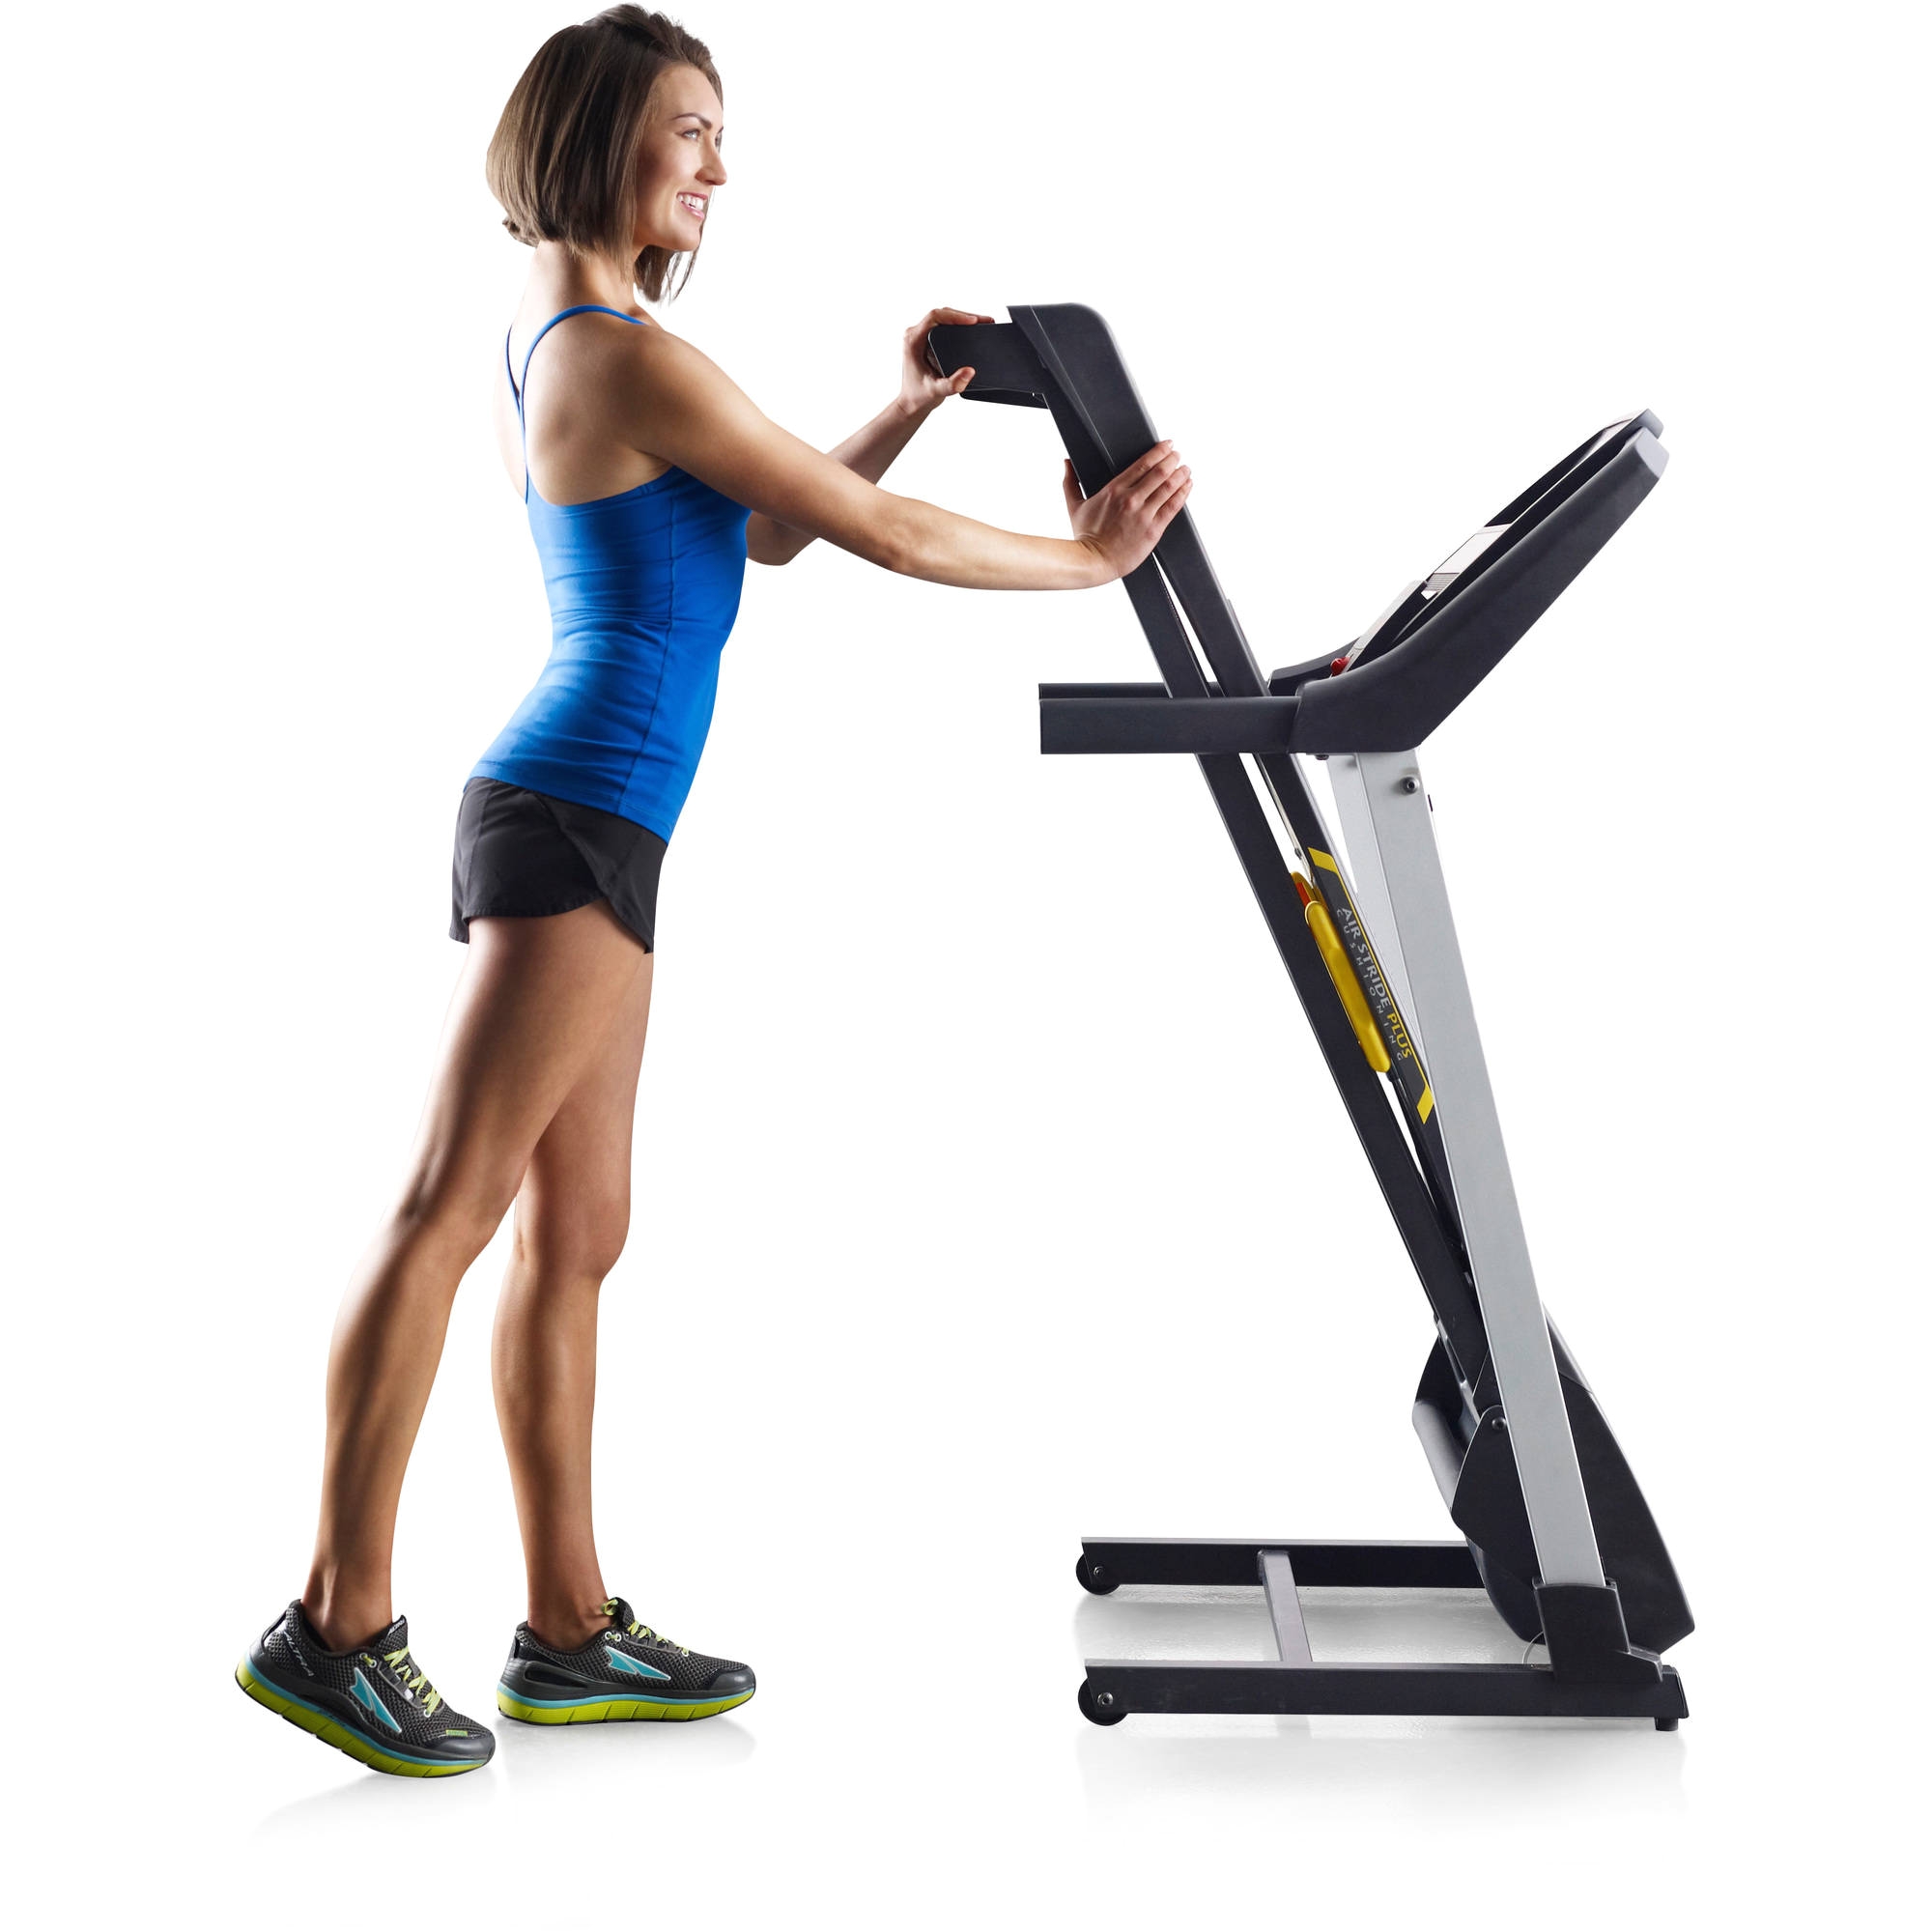 golds gym trainer 430i treadmill with easy assembly and power incline walmart com